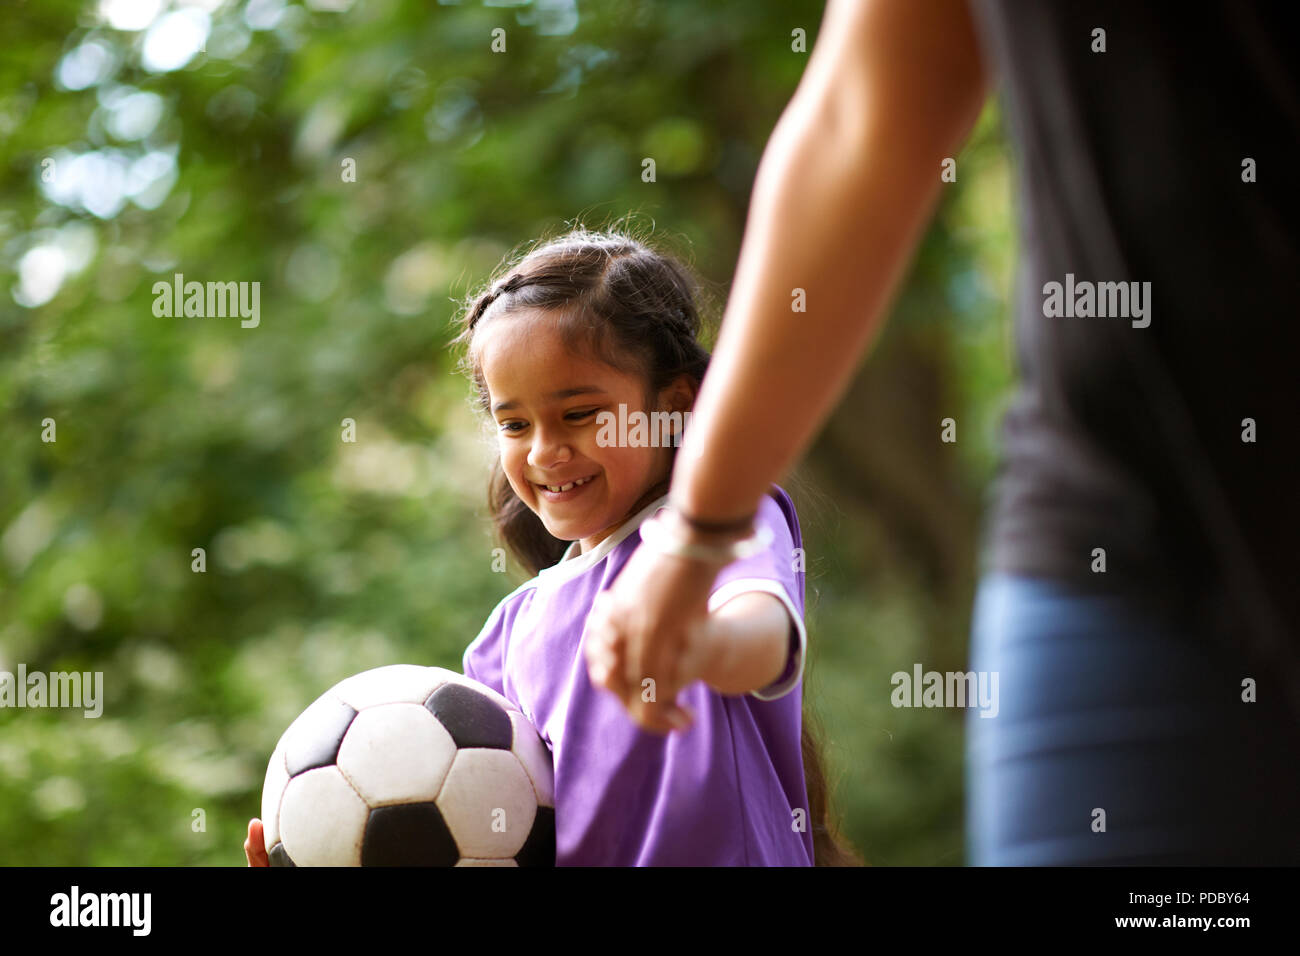 Smiling girl with soccer ball holding hands with mother Stock Photo